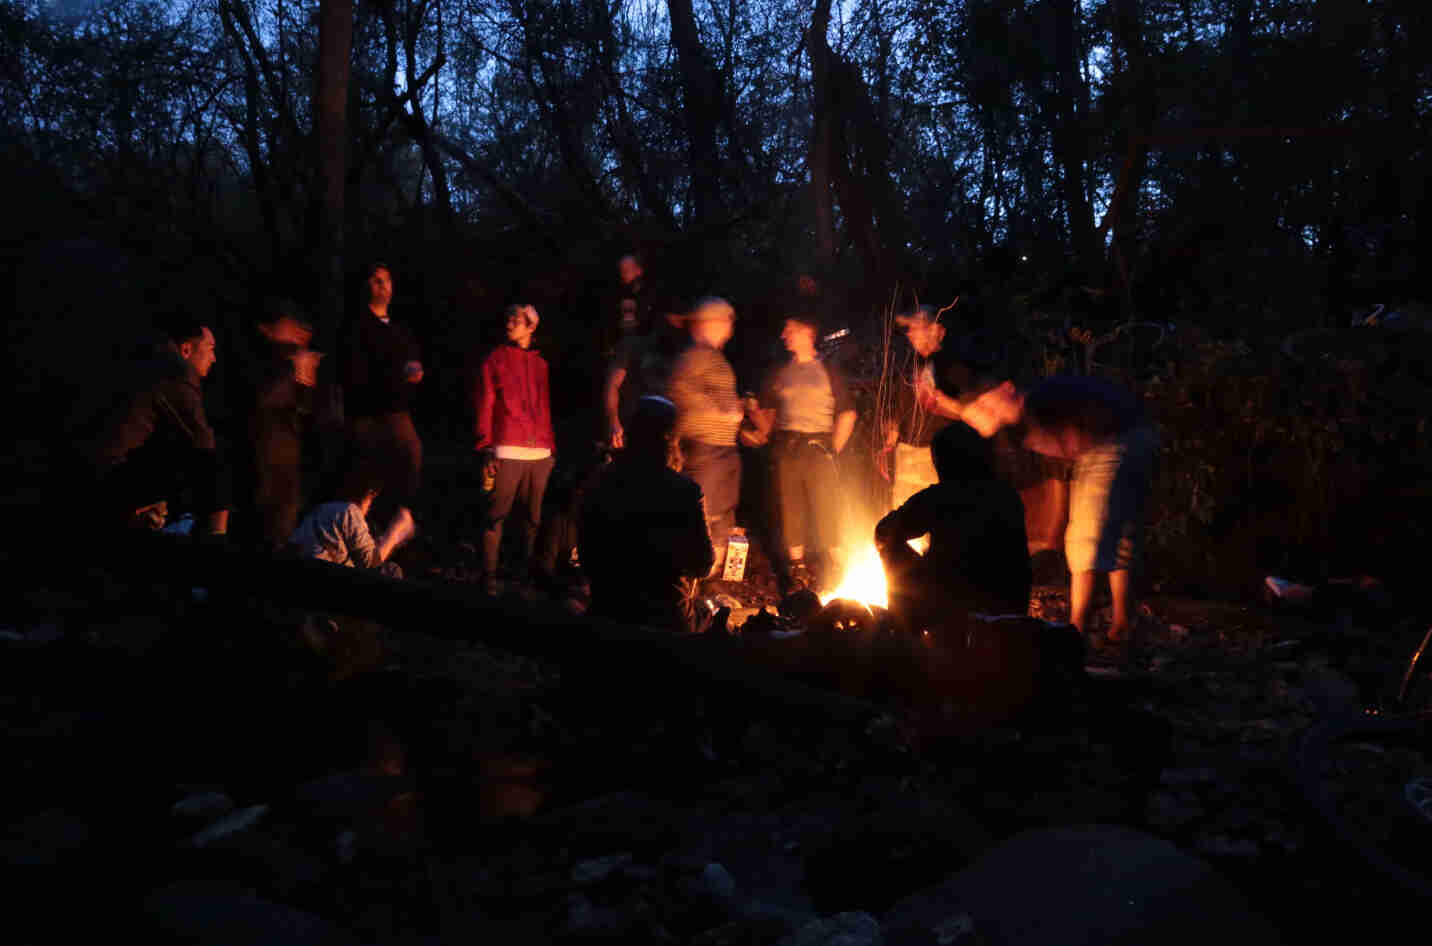 A group of people gathered around a campfire in the woods at night